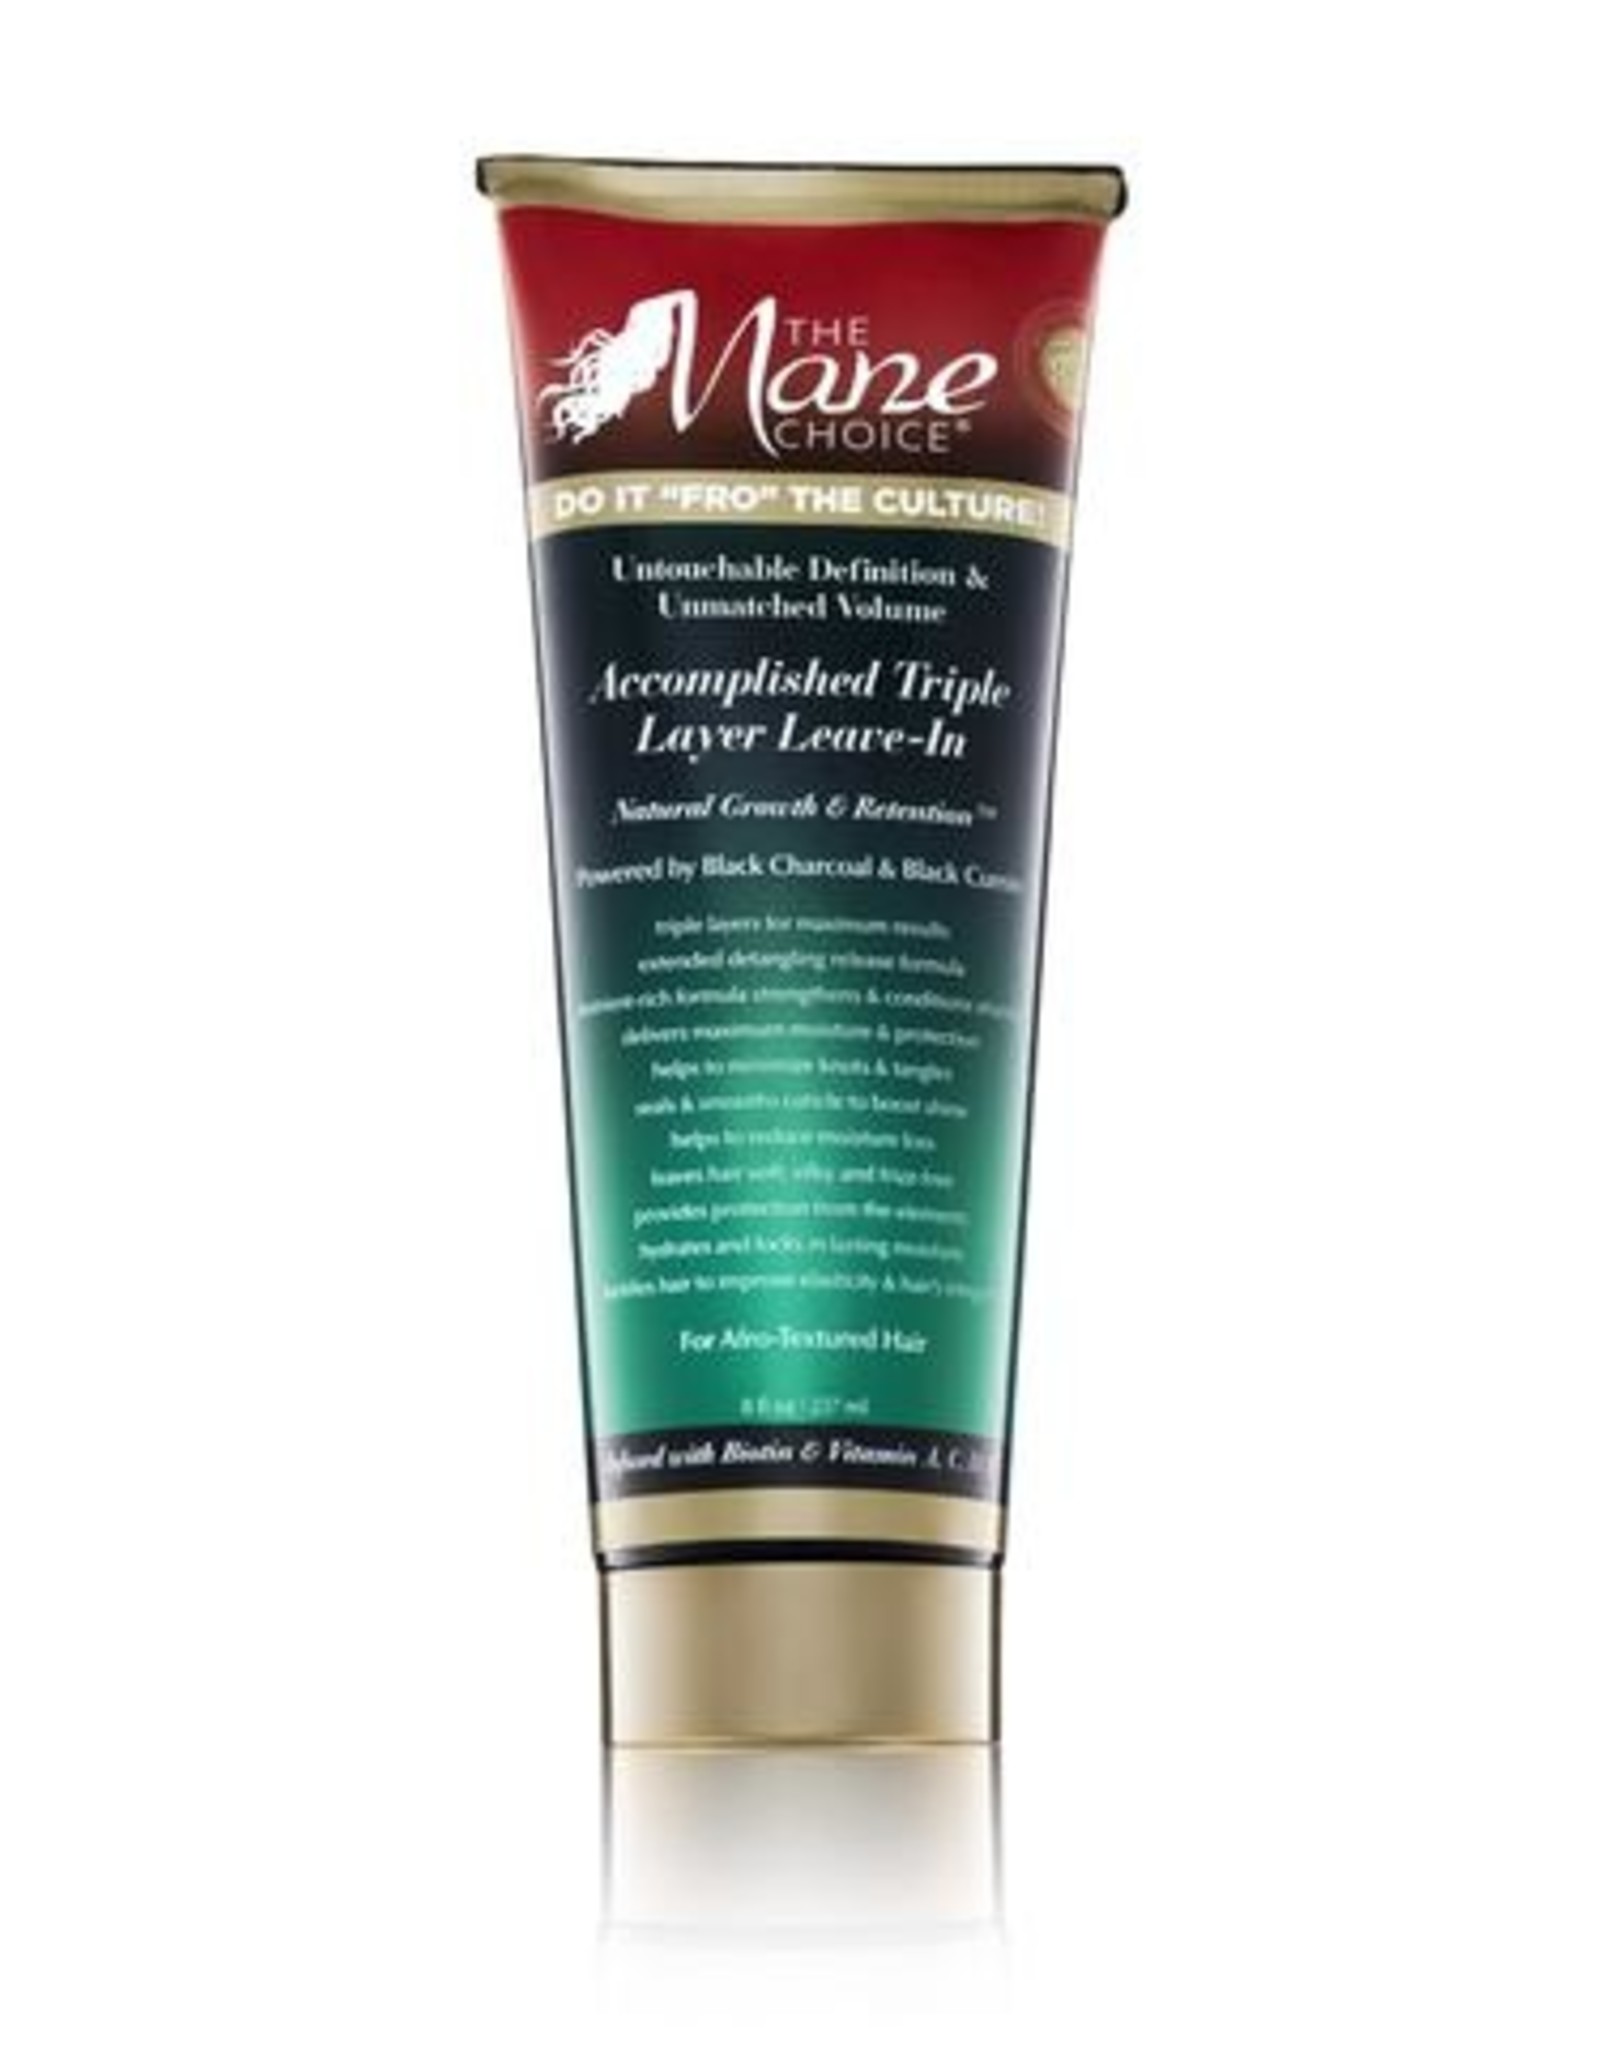 THE MANE CHOICE THE MANE CHOICE ACCOMPLISHED TRIPLE LAYER LEAVE-IN 8fl oz